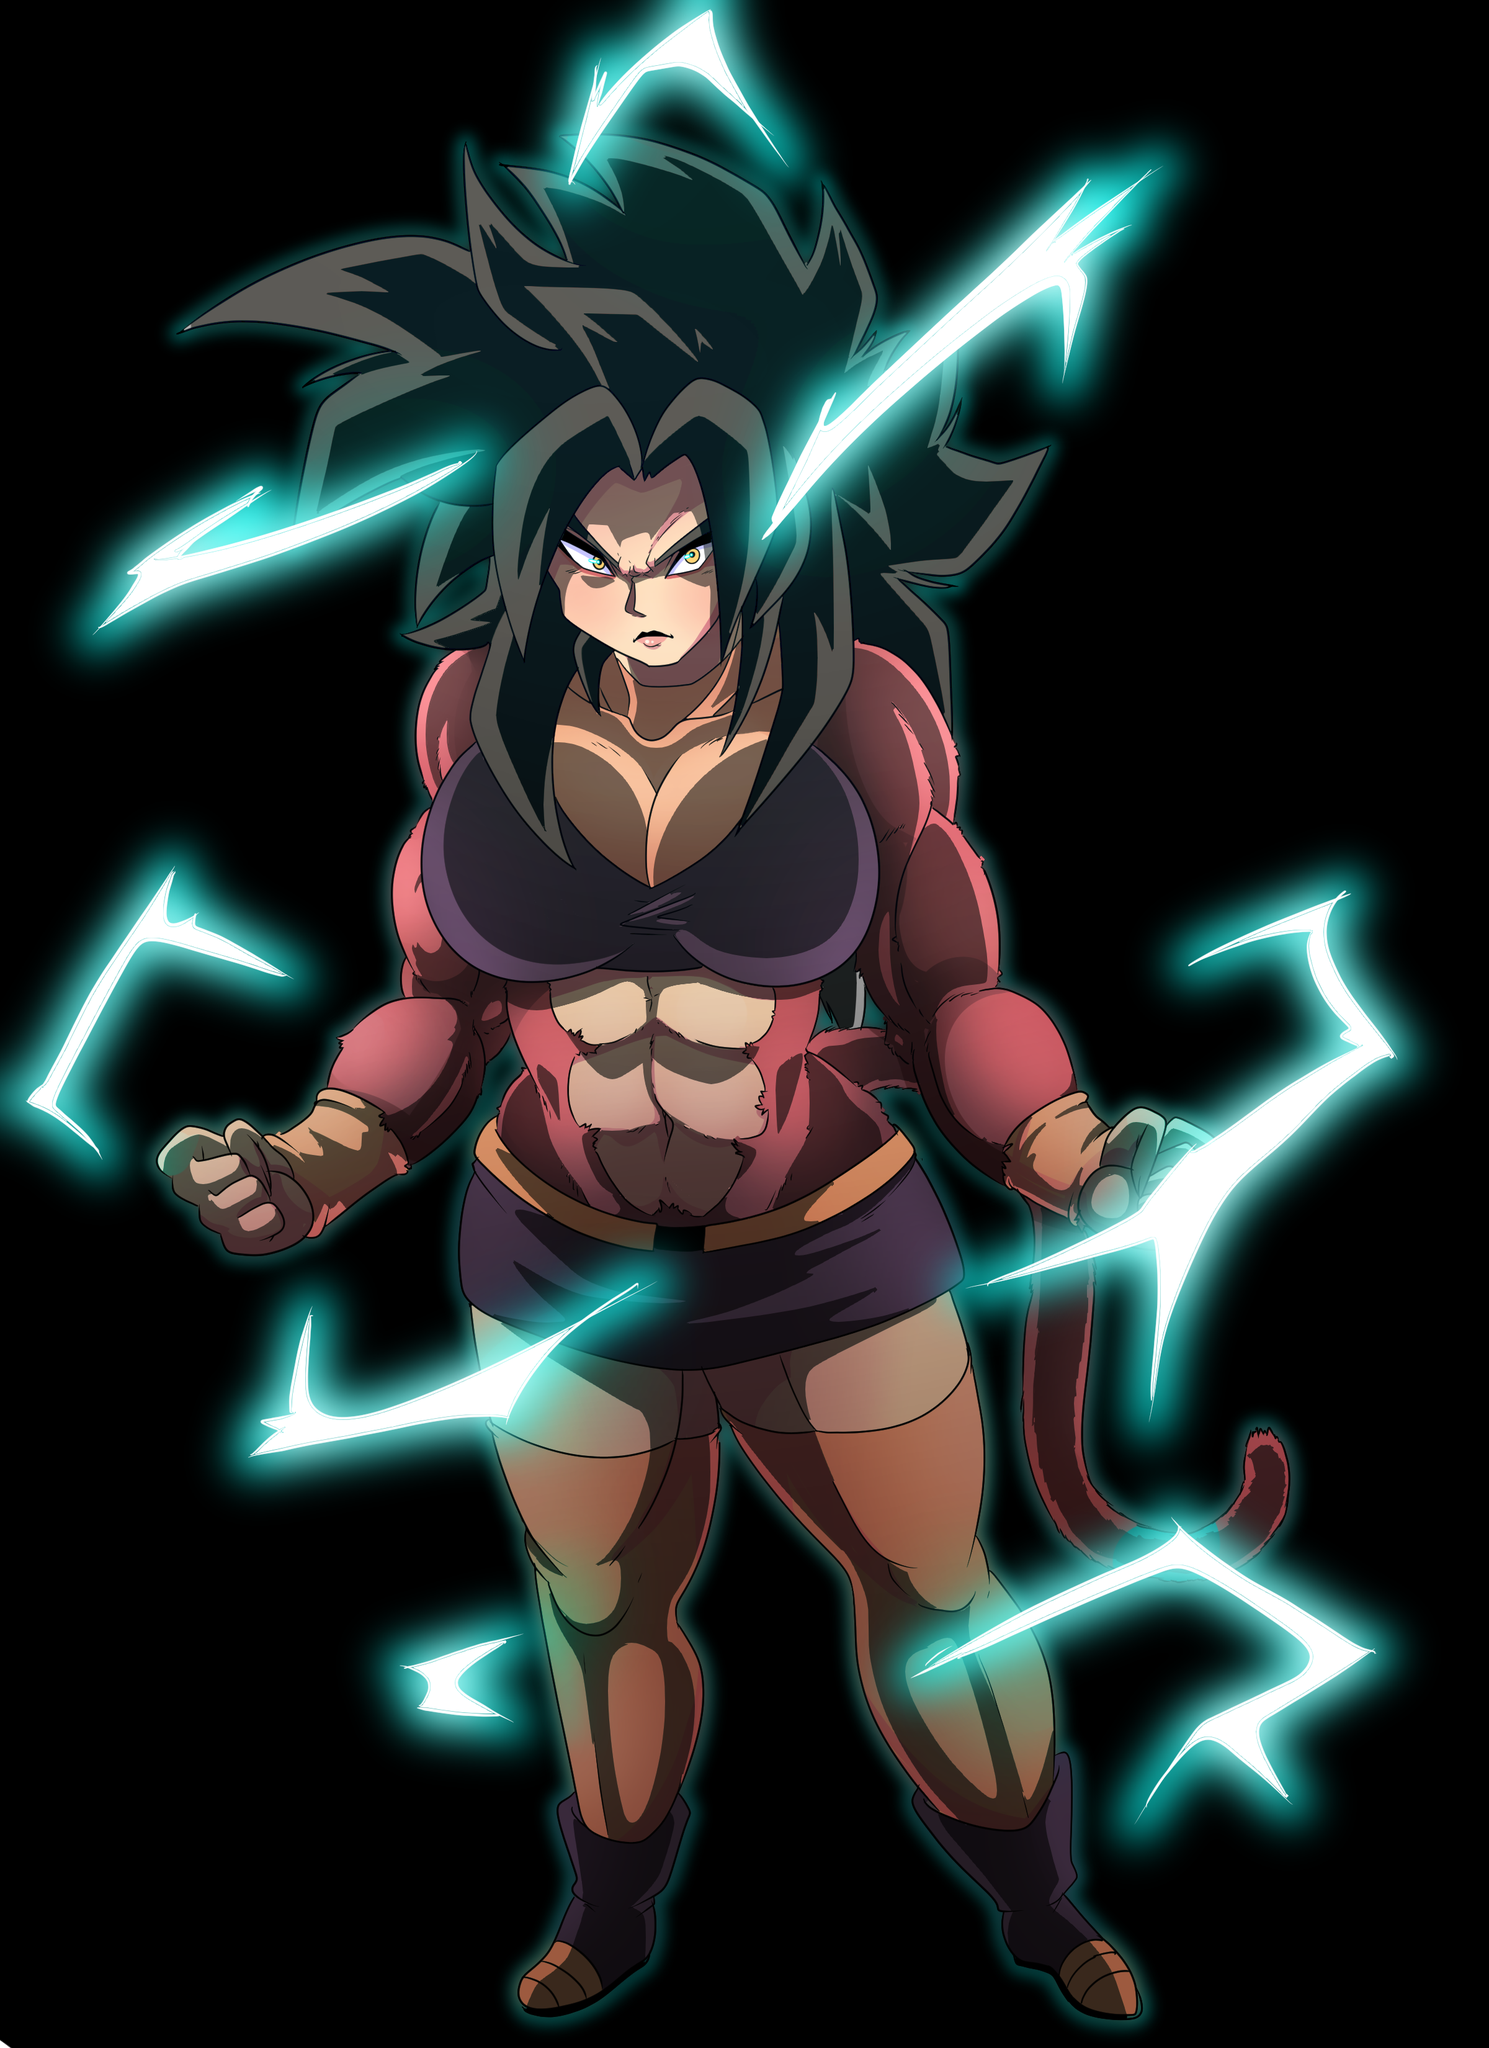 Commission I did today, a Super Saiyan 4 OC named Ziva from over on the Dra...